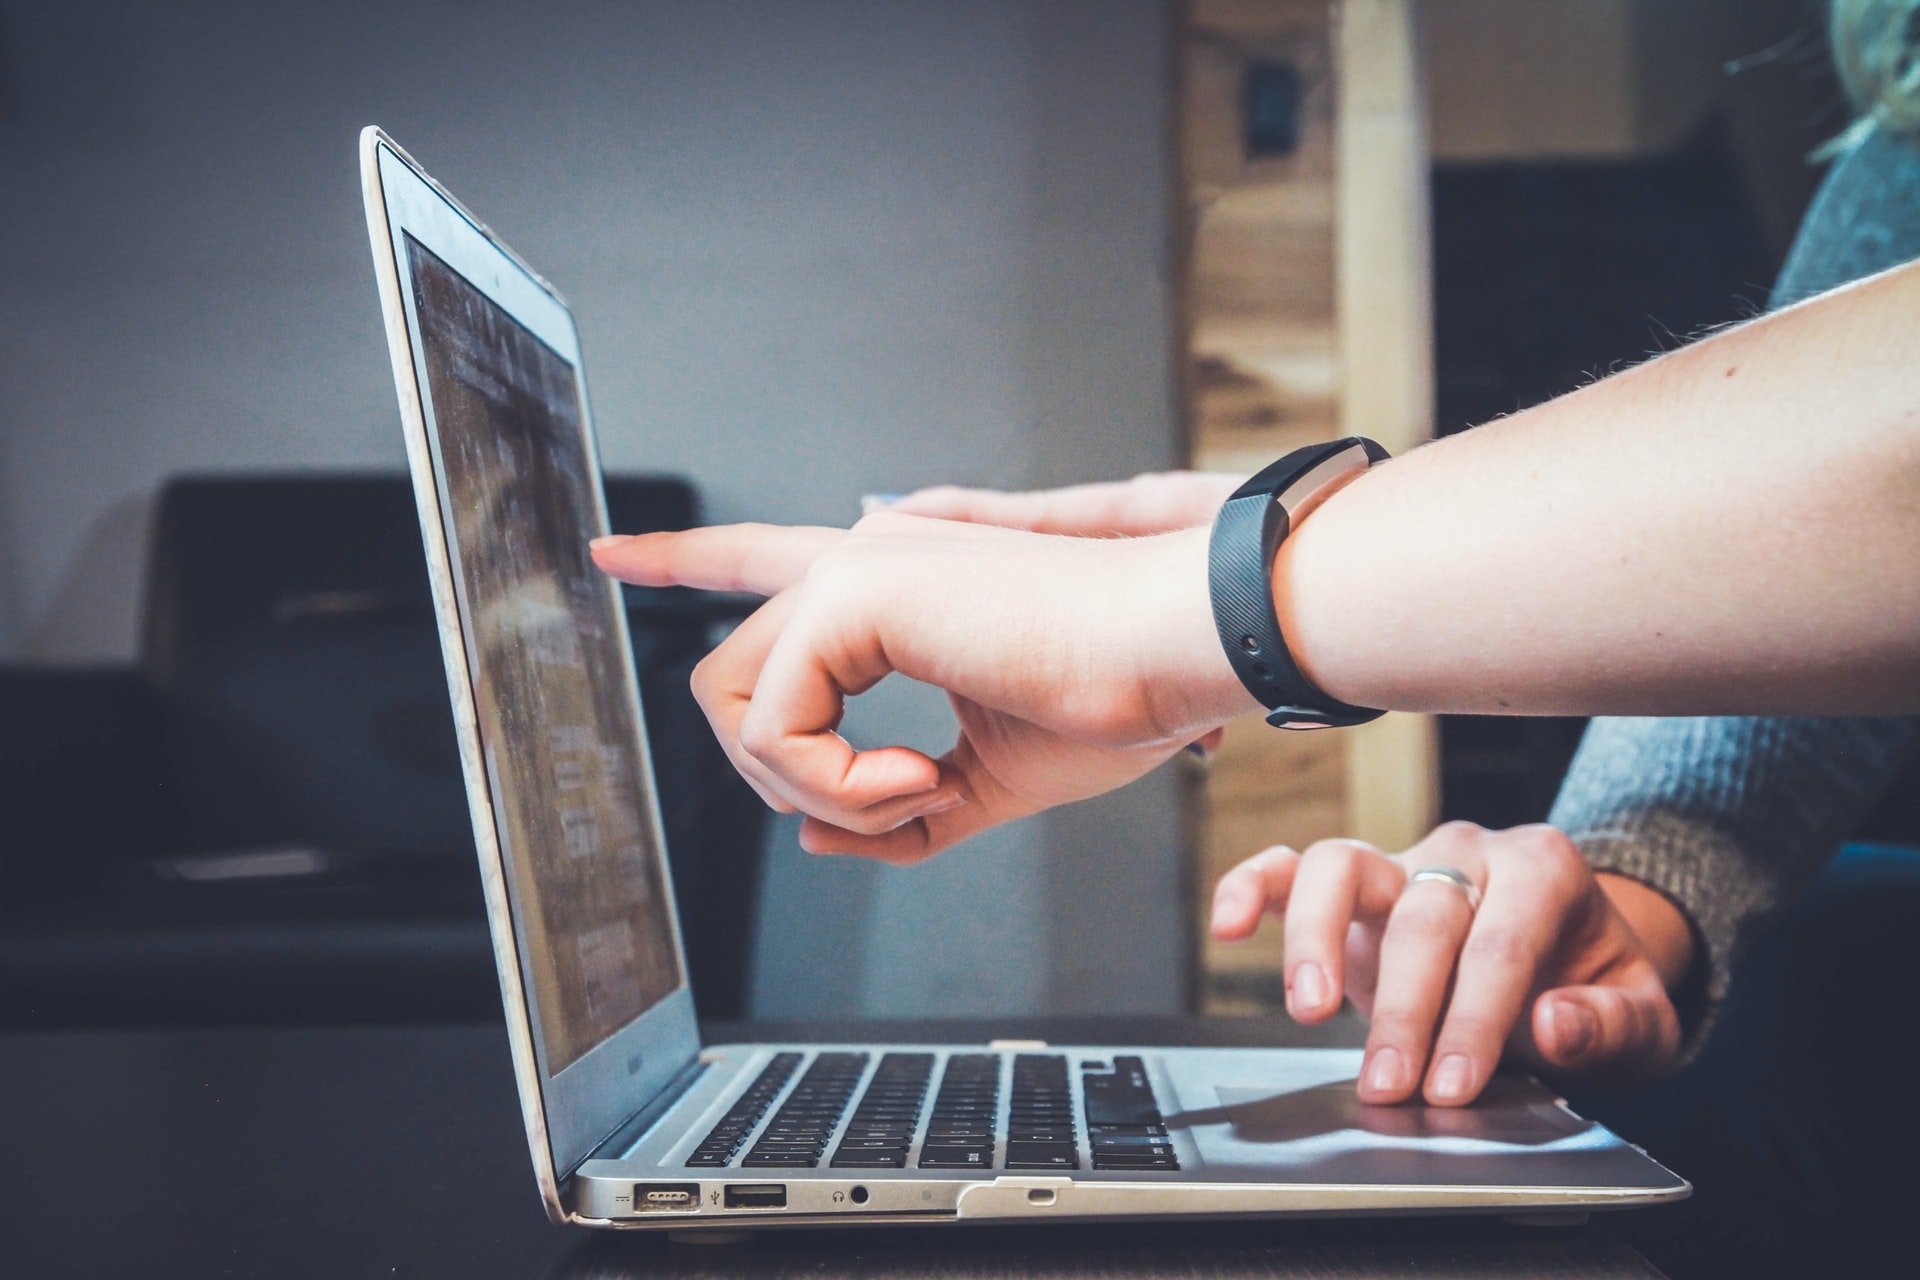 Two people pointing at a laptop screen [Photo by John Schnobrich on Unsplash]